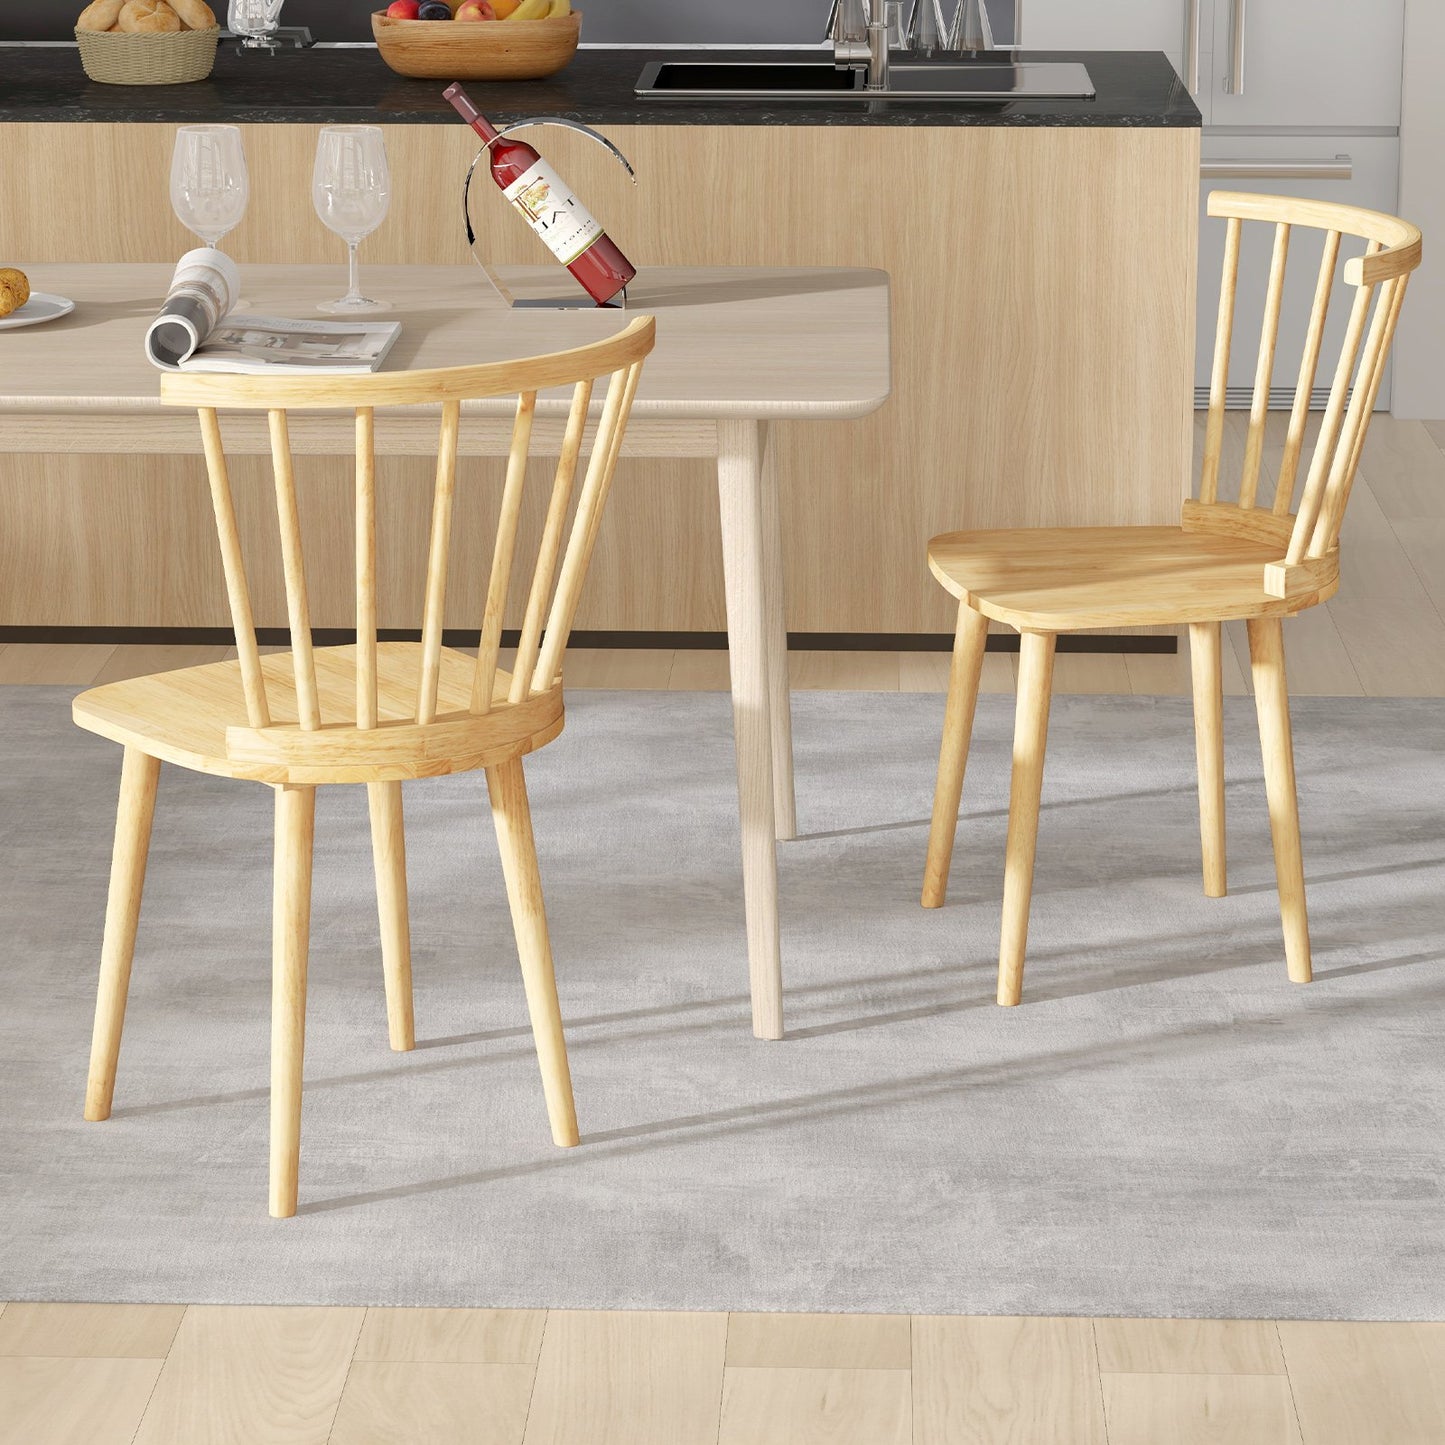 Windsor Dining Chairs Set of 2 Rubber Wood Kitchen Chairs with Spindle Back, Natural